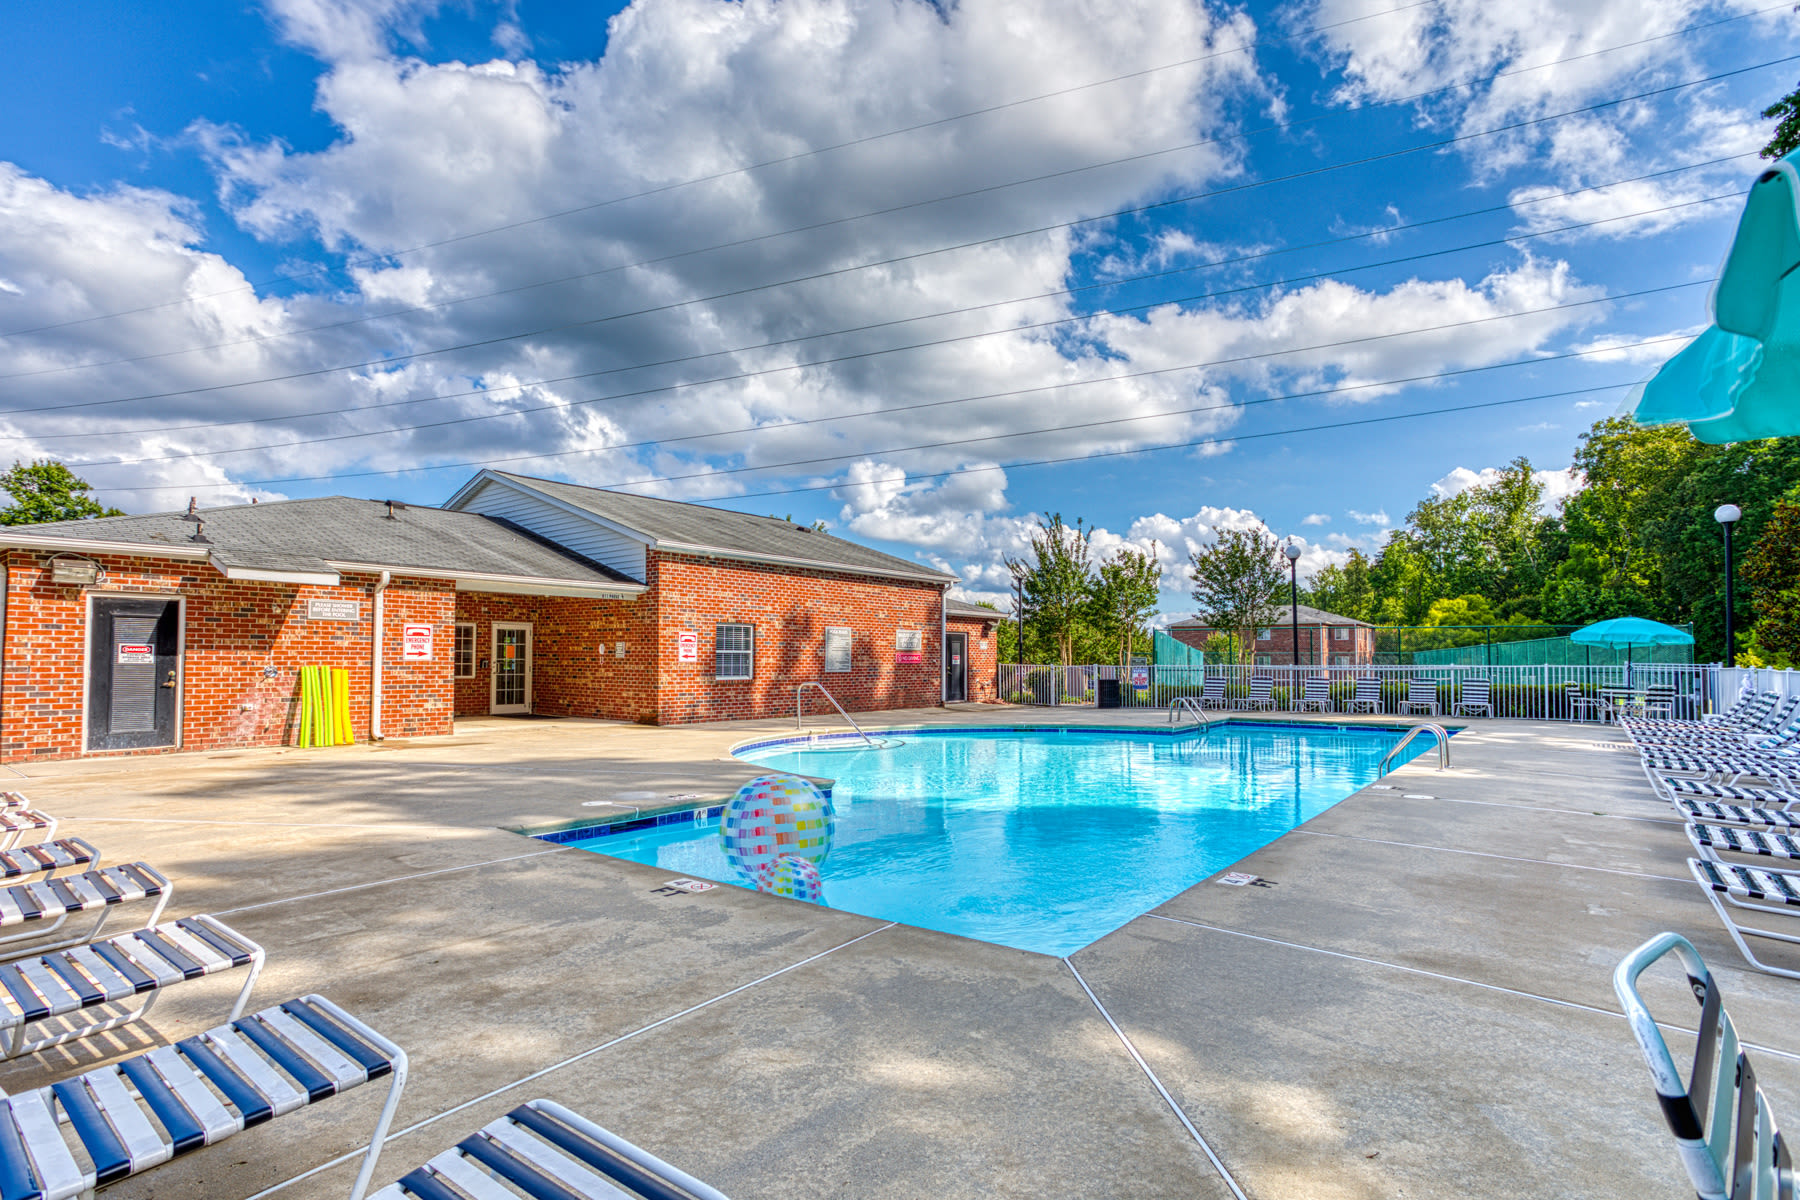 Pool area at Copper Mill Village in High Point, North Carolina